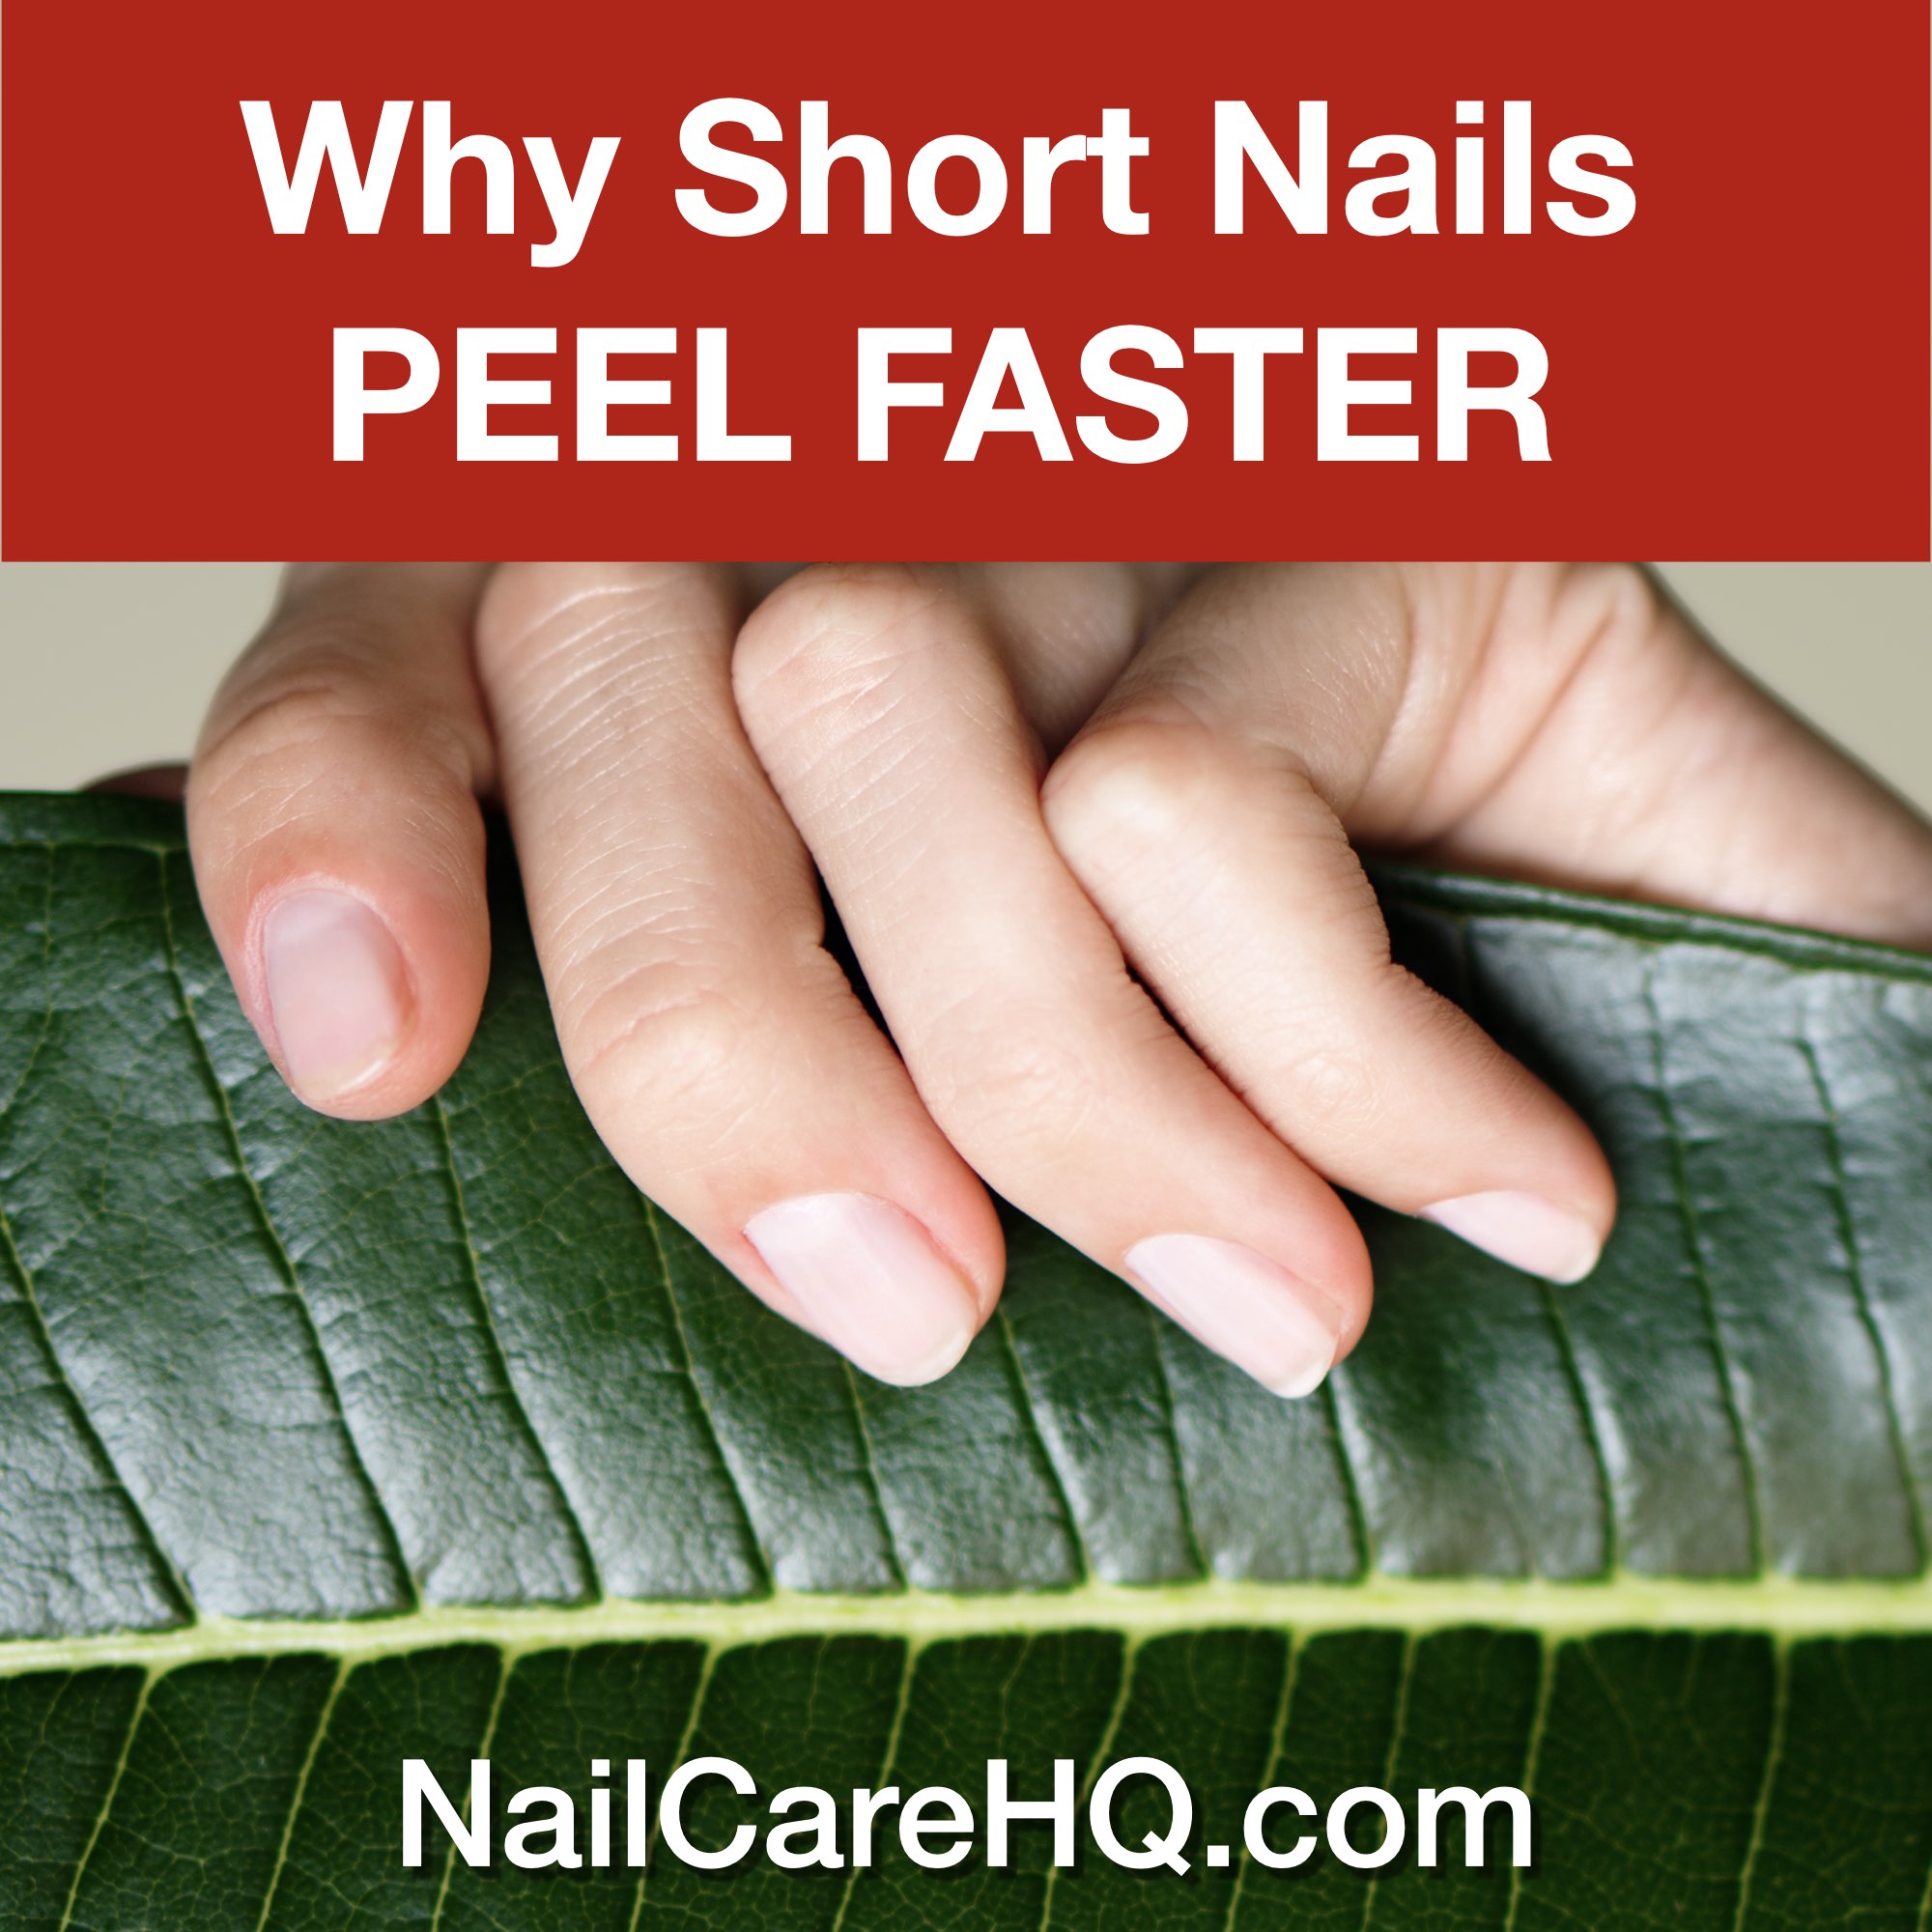 Title Image Why short nails peel faster than long nails